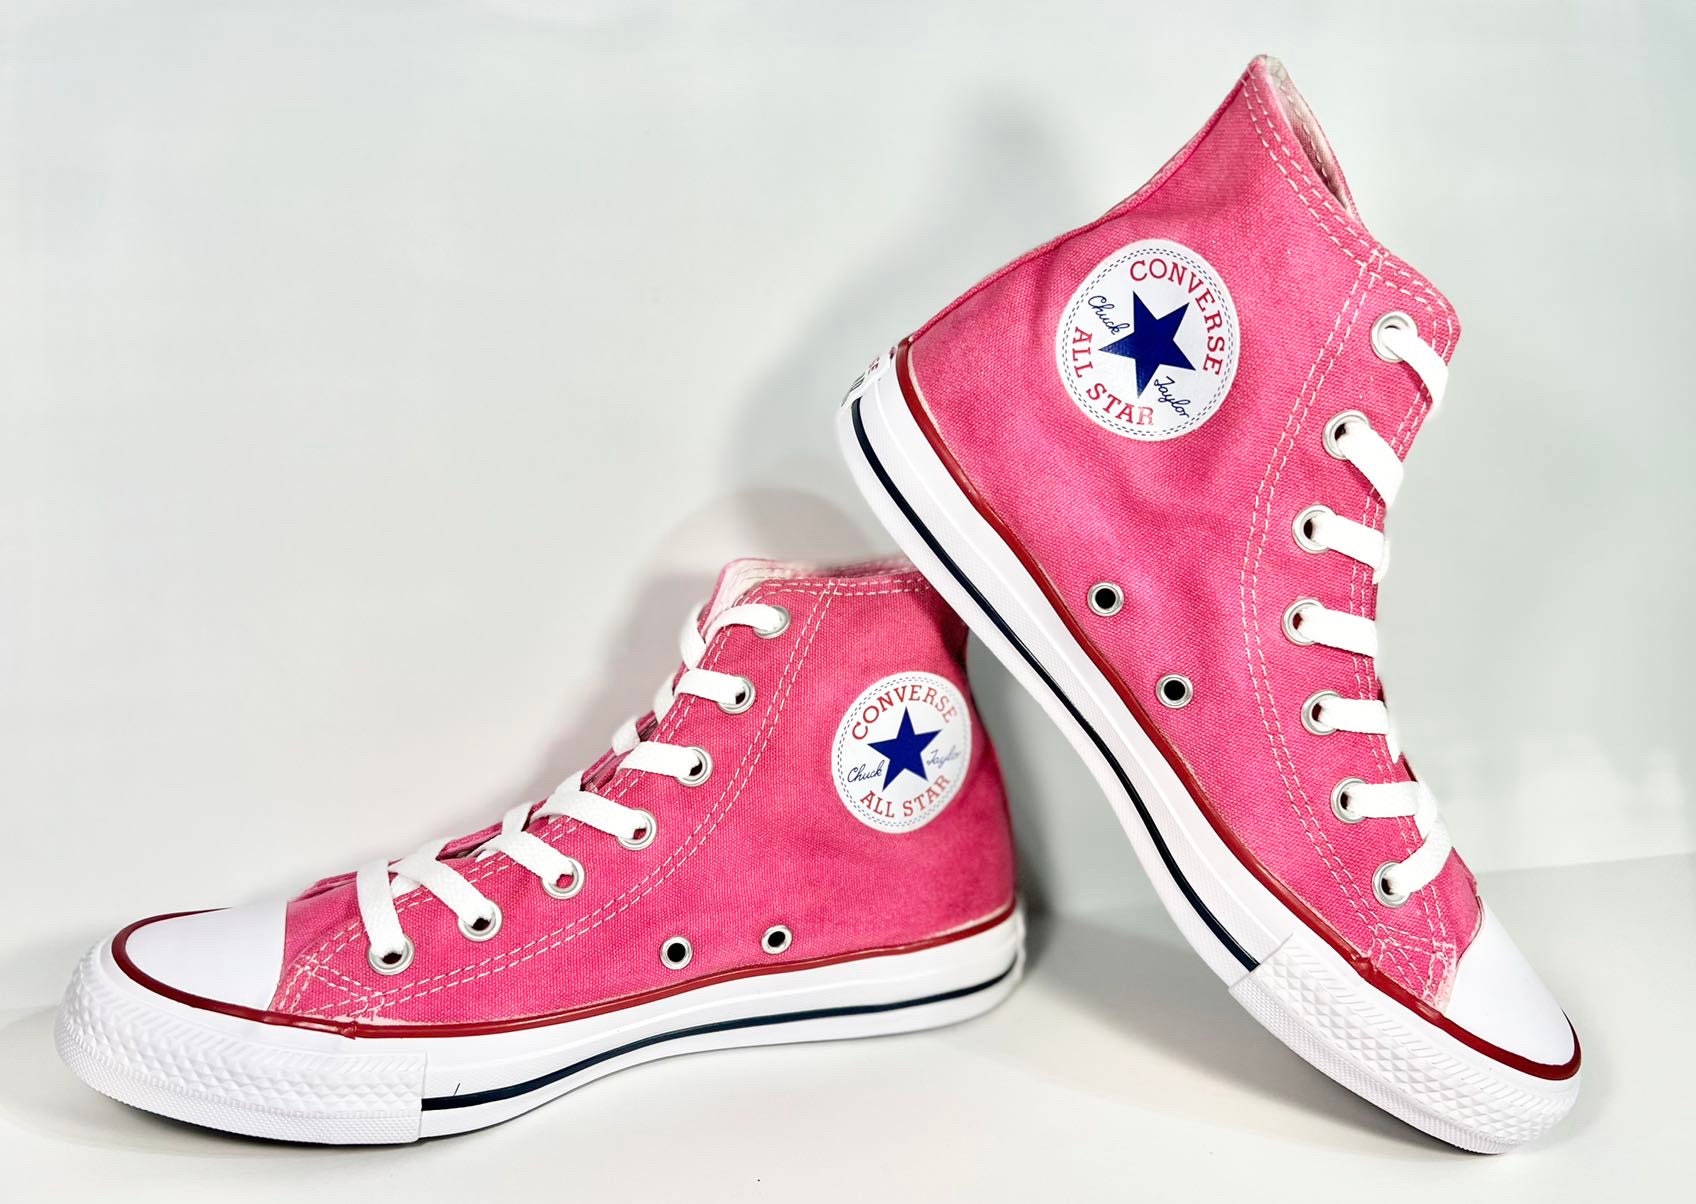 Custom Dyed Hot Pink Converse All Star High Tops Shoes - Etsy